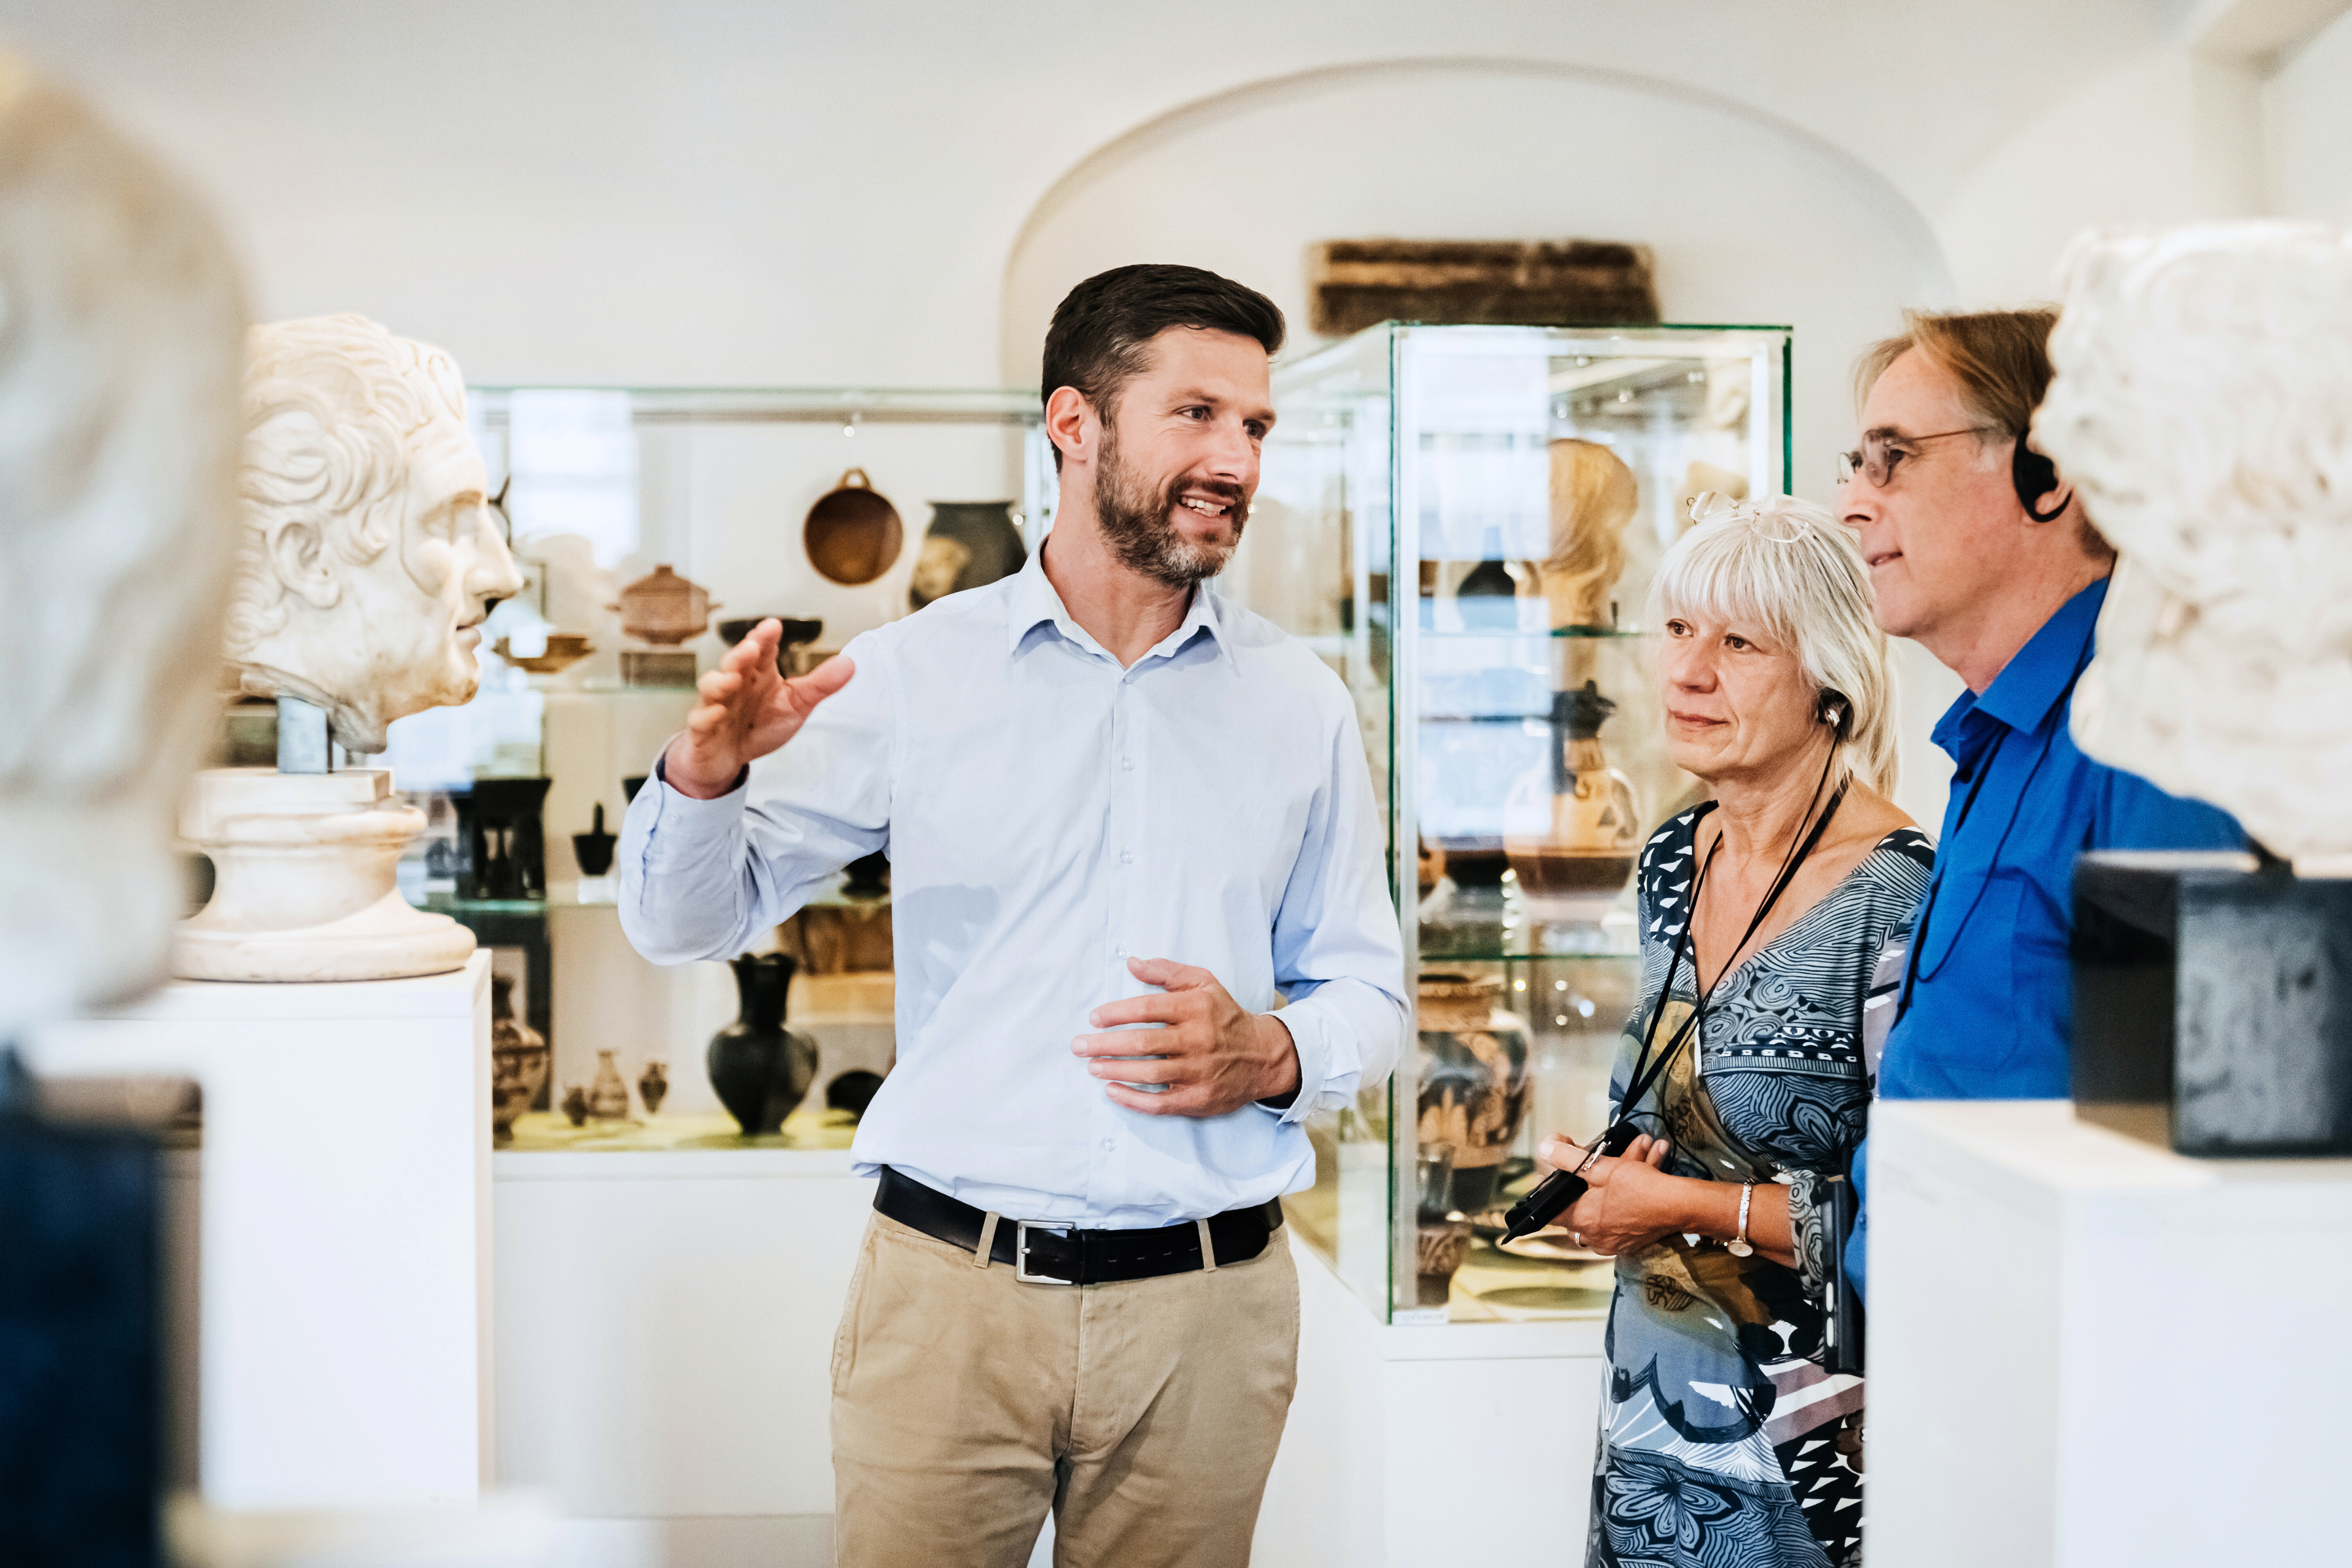 Discover how AI is reshaping nonprofits, optimizing fundraising, conservation, and resource allocation. Pictured is a museum worker showcasing off exhibits to an older couple.